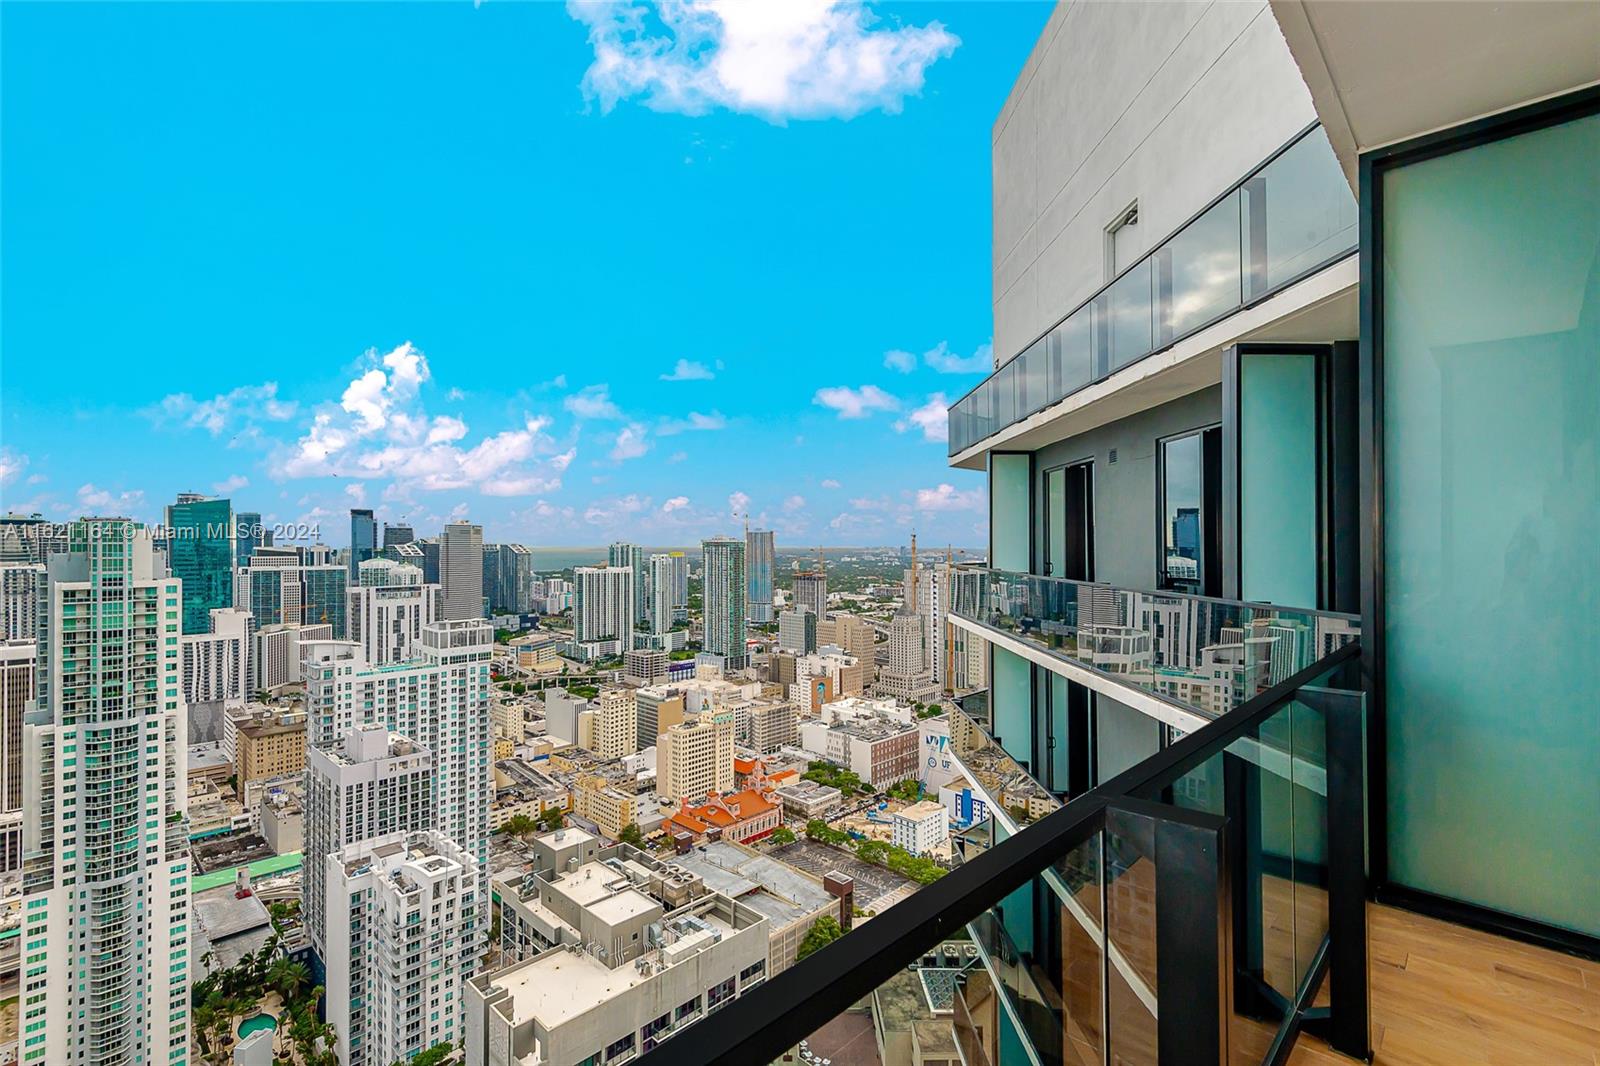 Experience the epitome of luxury and contemporary living with this fully furnished investment opportunity at THE ELSER MIAMI. Offering the most exquisite experience in Miami, this unit boasts stunning views of downtown Miami and Biscayne Bay and unrivaled amenities that will leave investors in awe. Featuring top-of-the-line cabinets and decor for both style and functionality, residents can enjoy a Michelin Star restaurant and abundant entertainment options in the surrounding area. With convenient access to shops, museums, parks, and major highways, as well as being just minutes away from South Beach and Key Biscayne, this property truly embodies the best of Miami living.